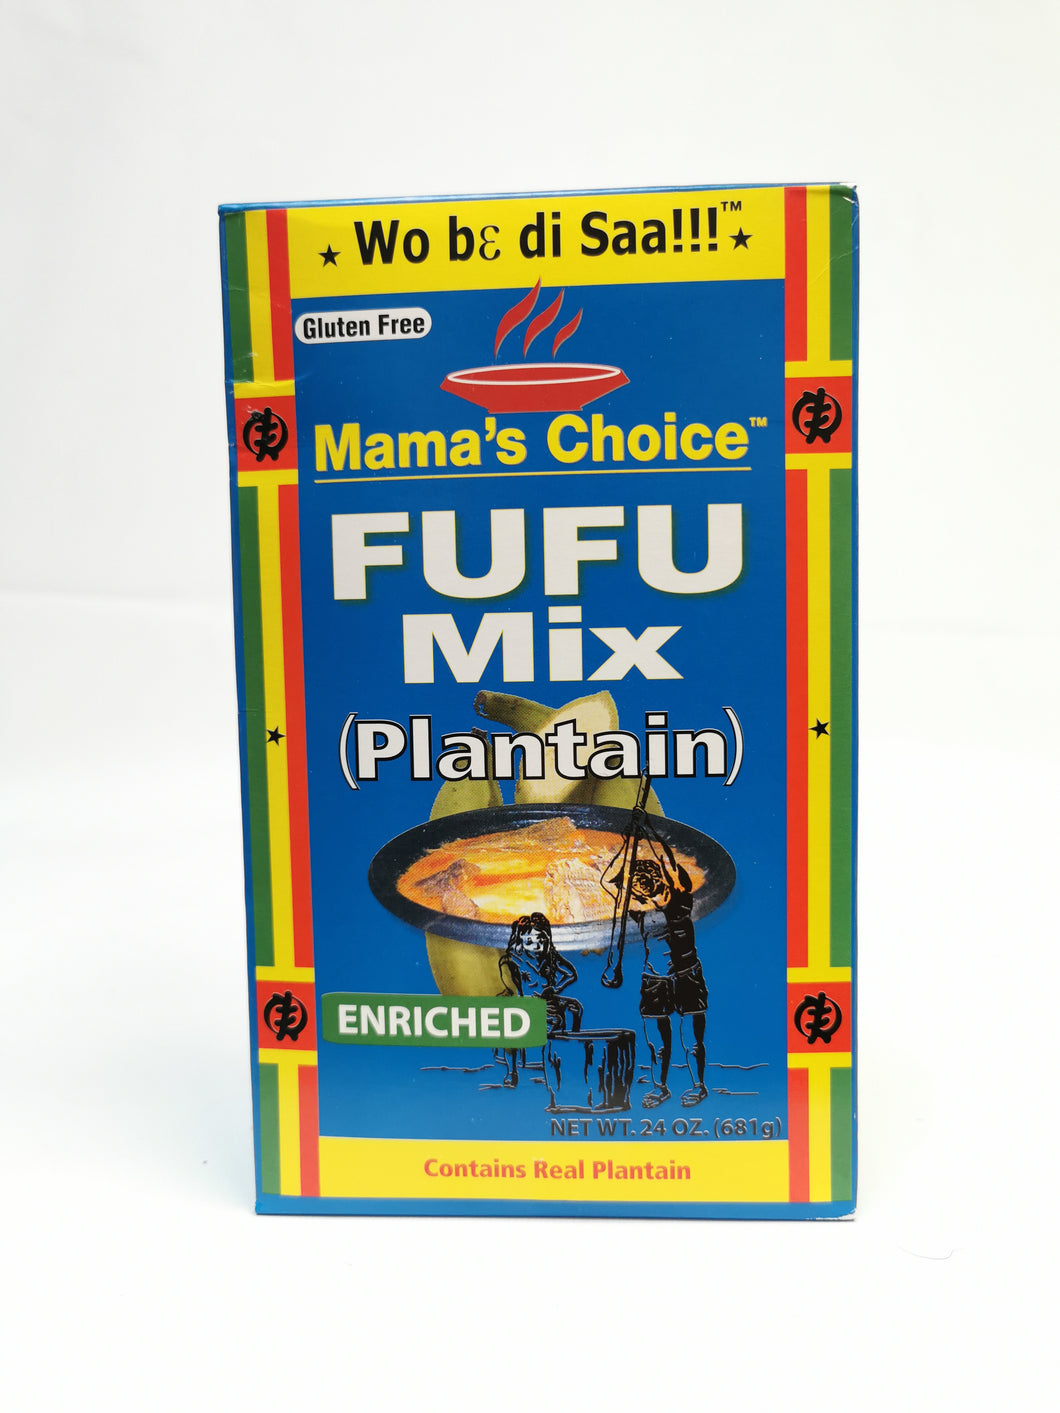 Mama's Choice Fufu Mix (Plantain) Enriched 681g